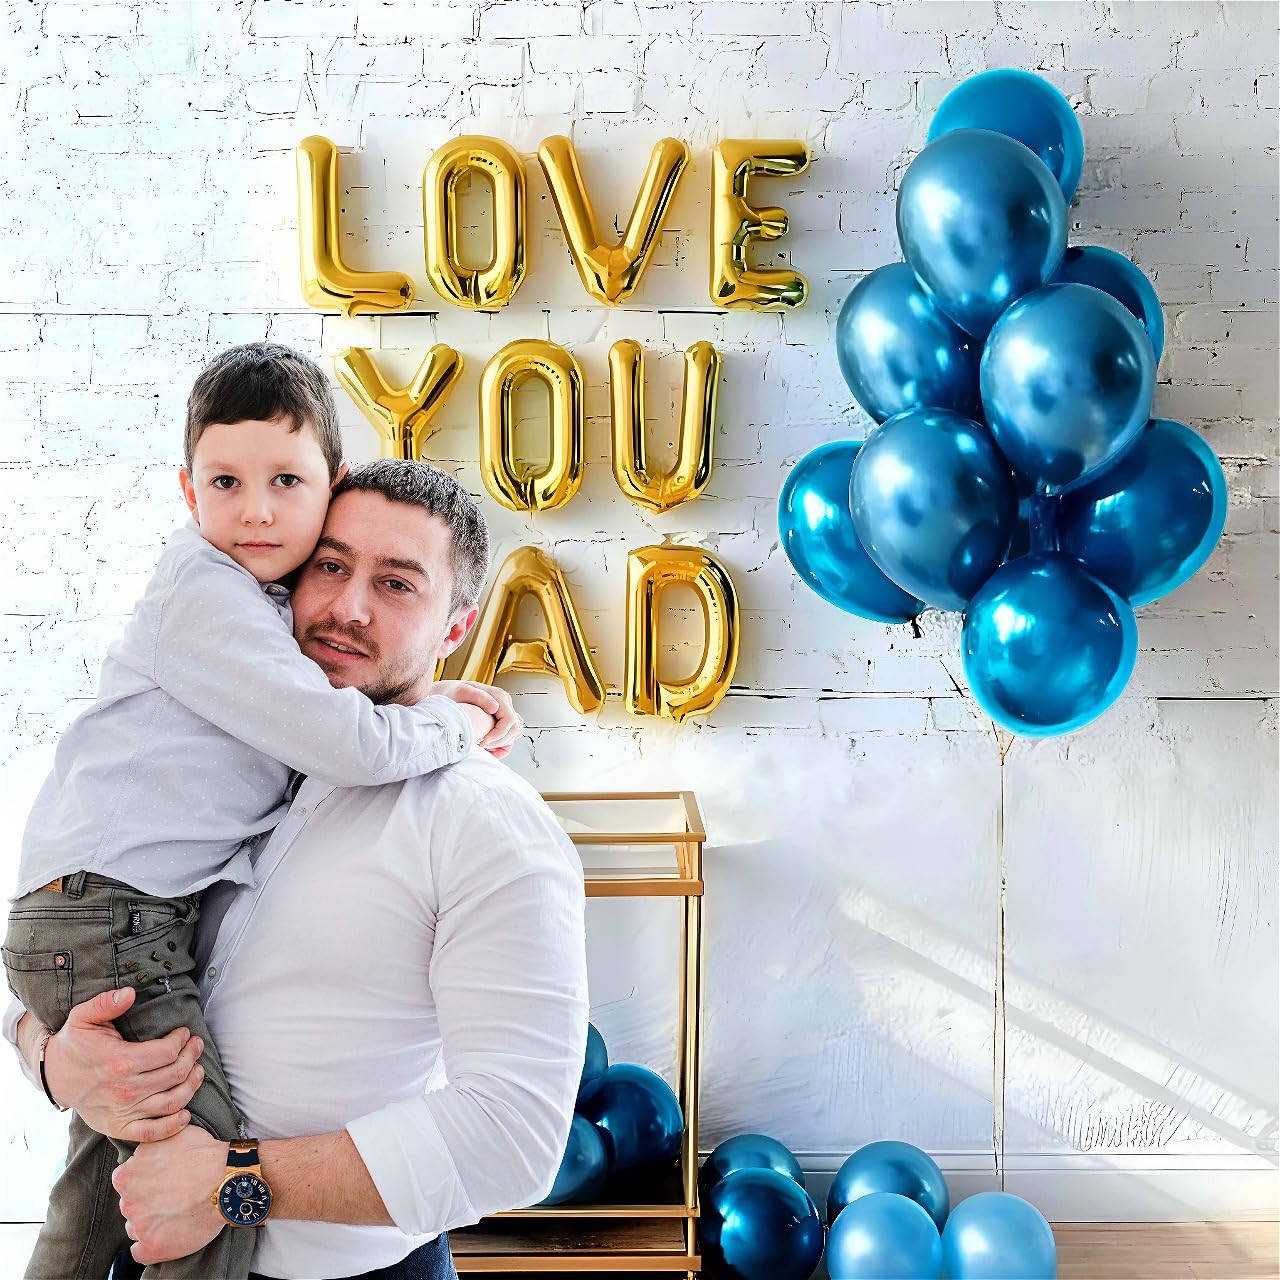 Make this Father's Day catchy with this decor kit